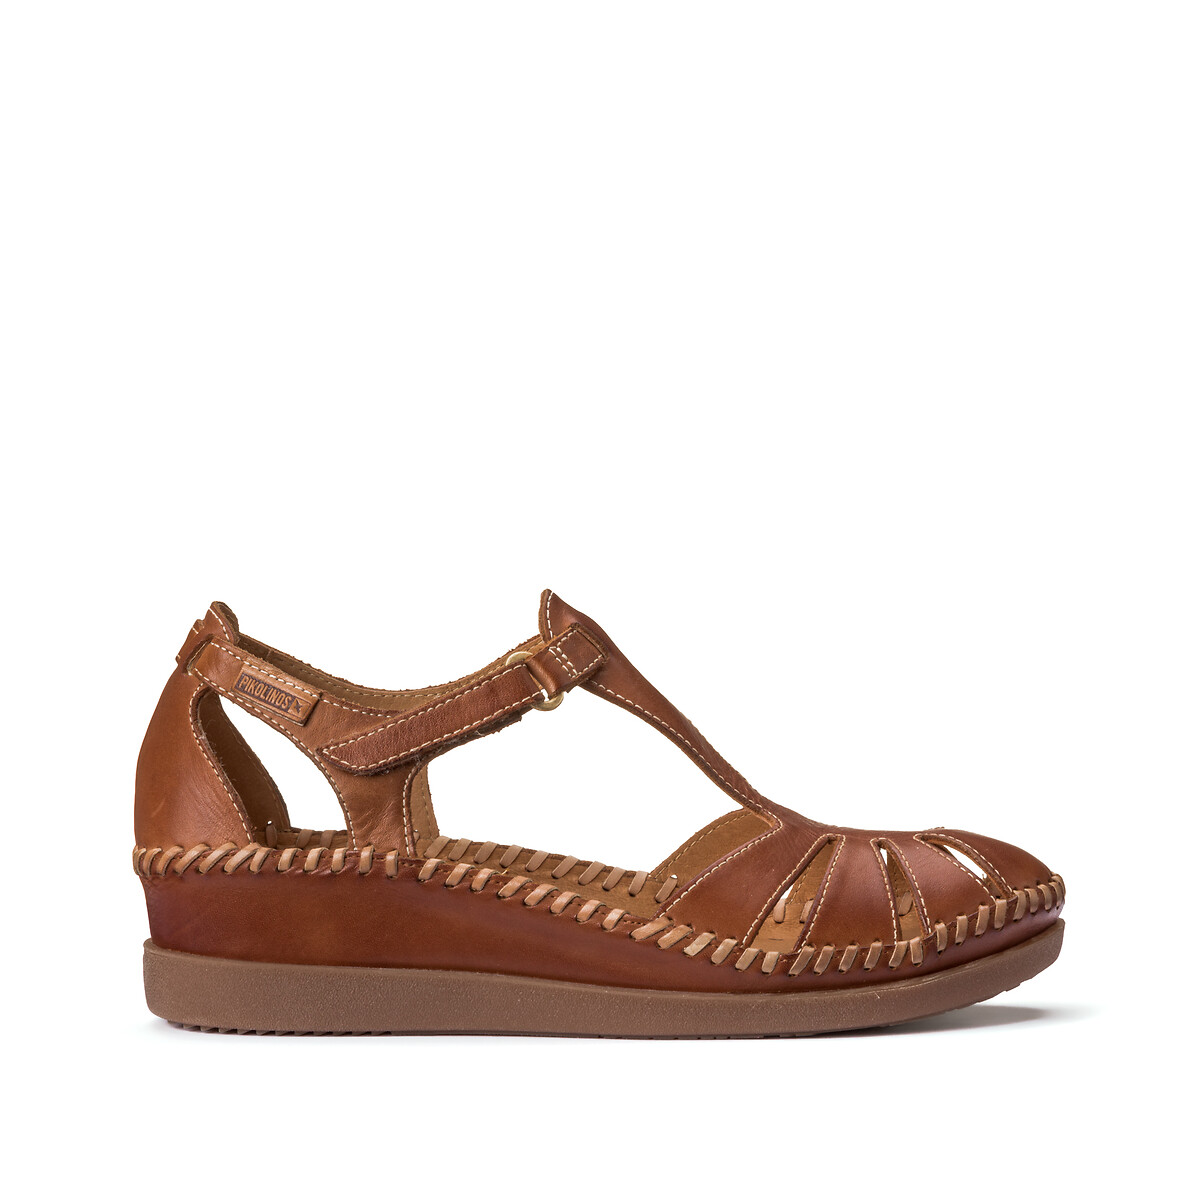 Image of Cadaques Leather Sandals with Wedge Heel